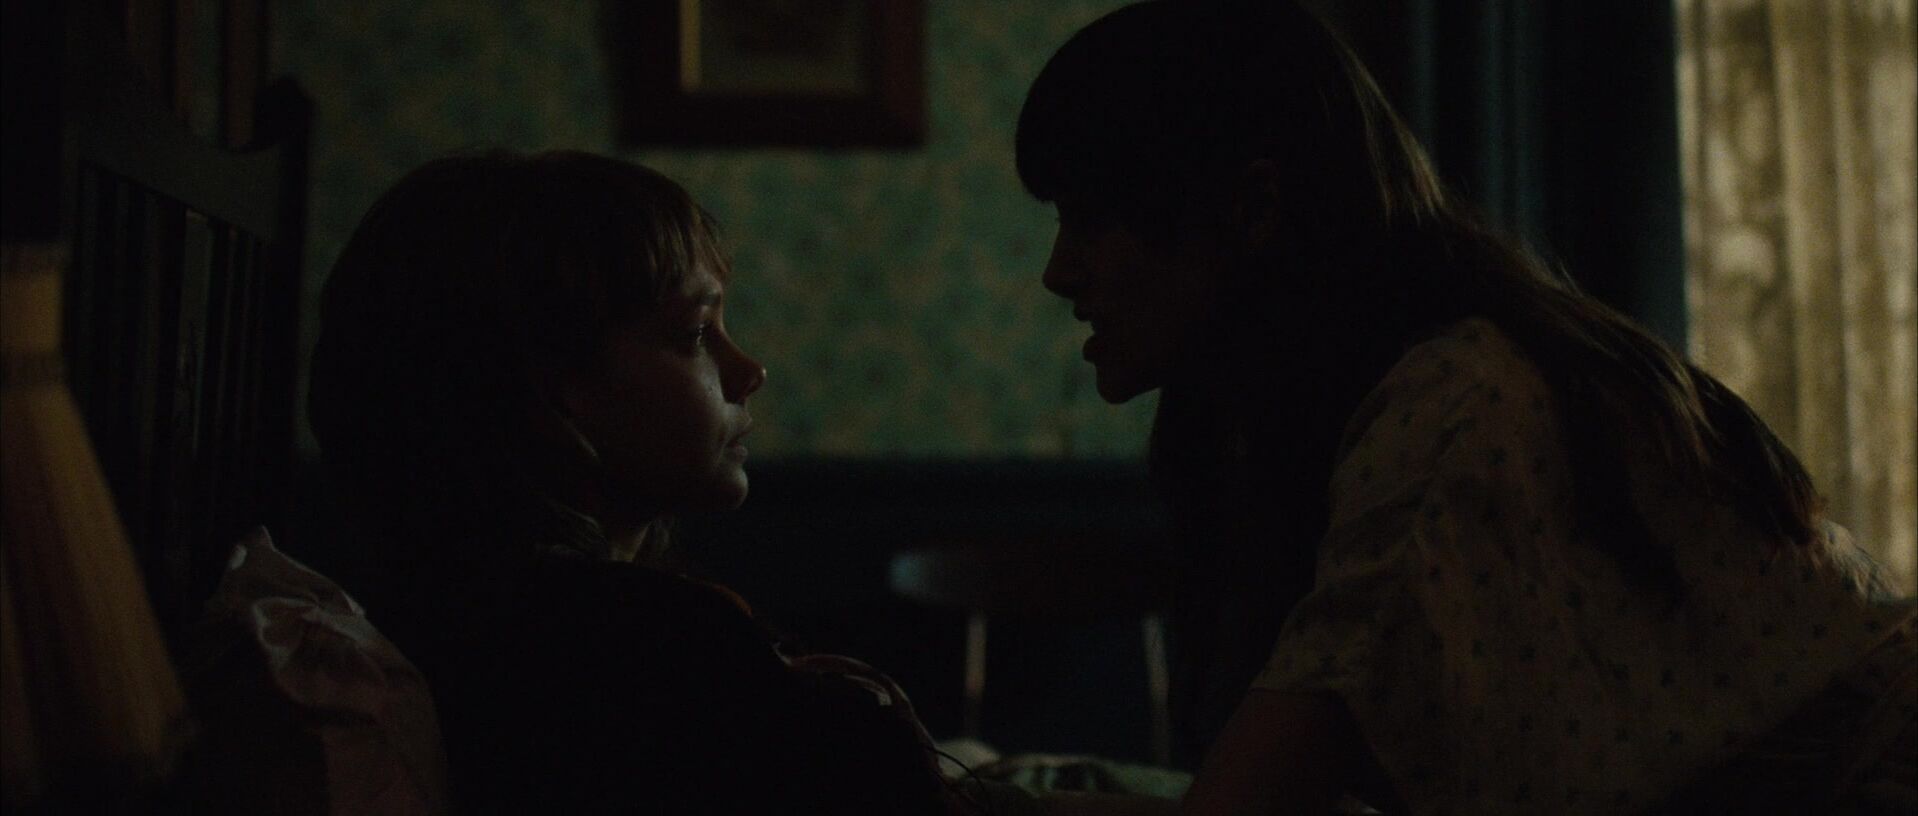 Keira Knightley and Carey Mulligan Nude Sex and Lesbian Kiss in Never Let Me Go HiDef 1080p!